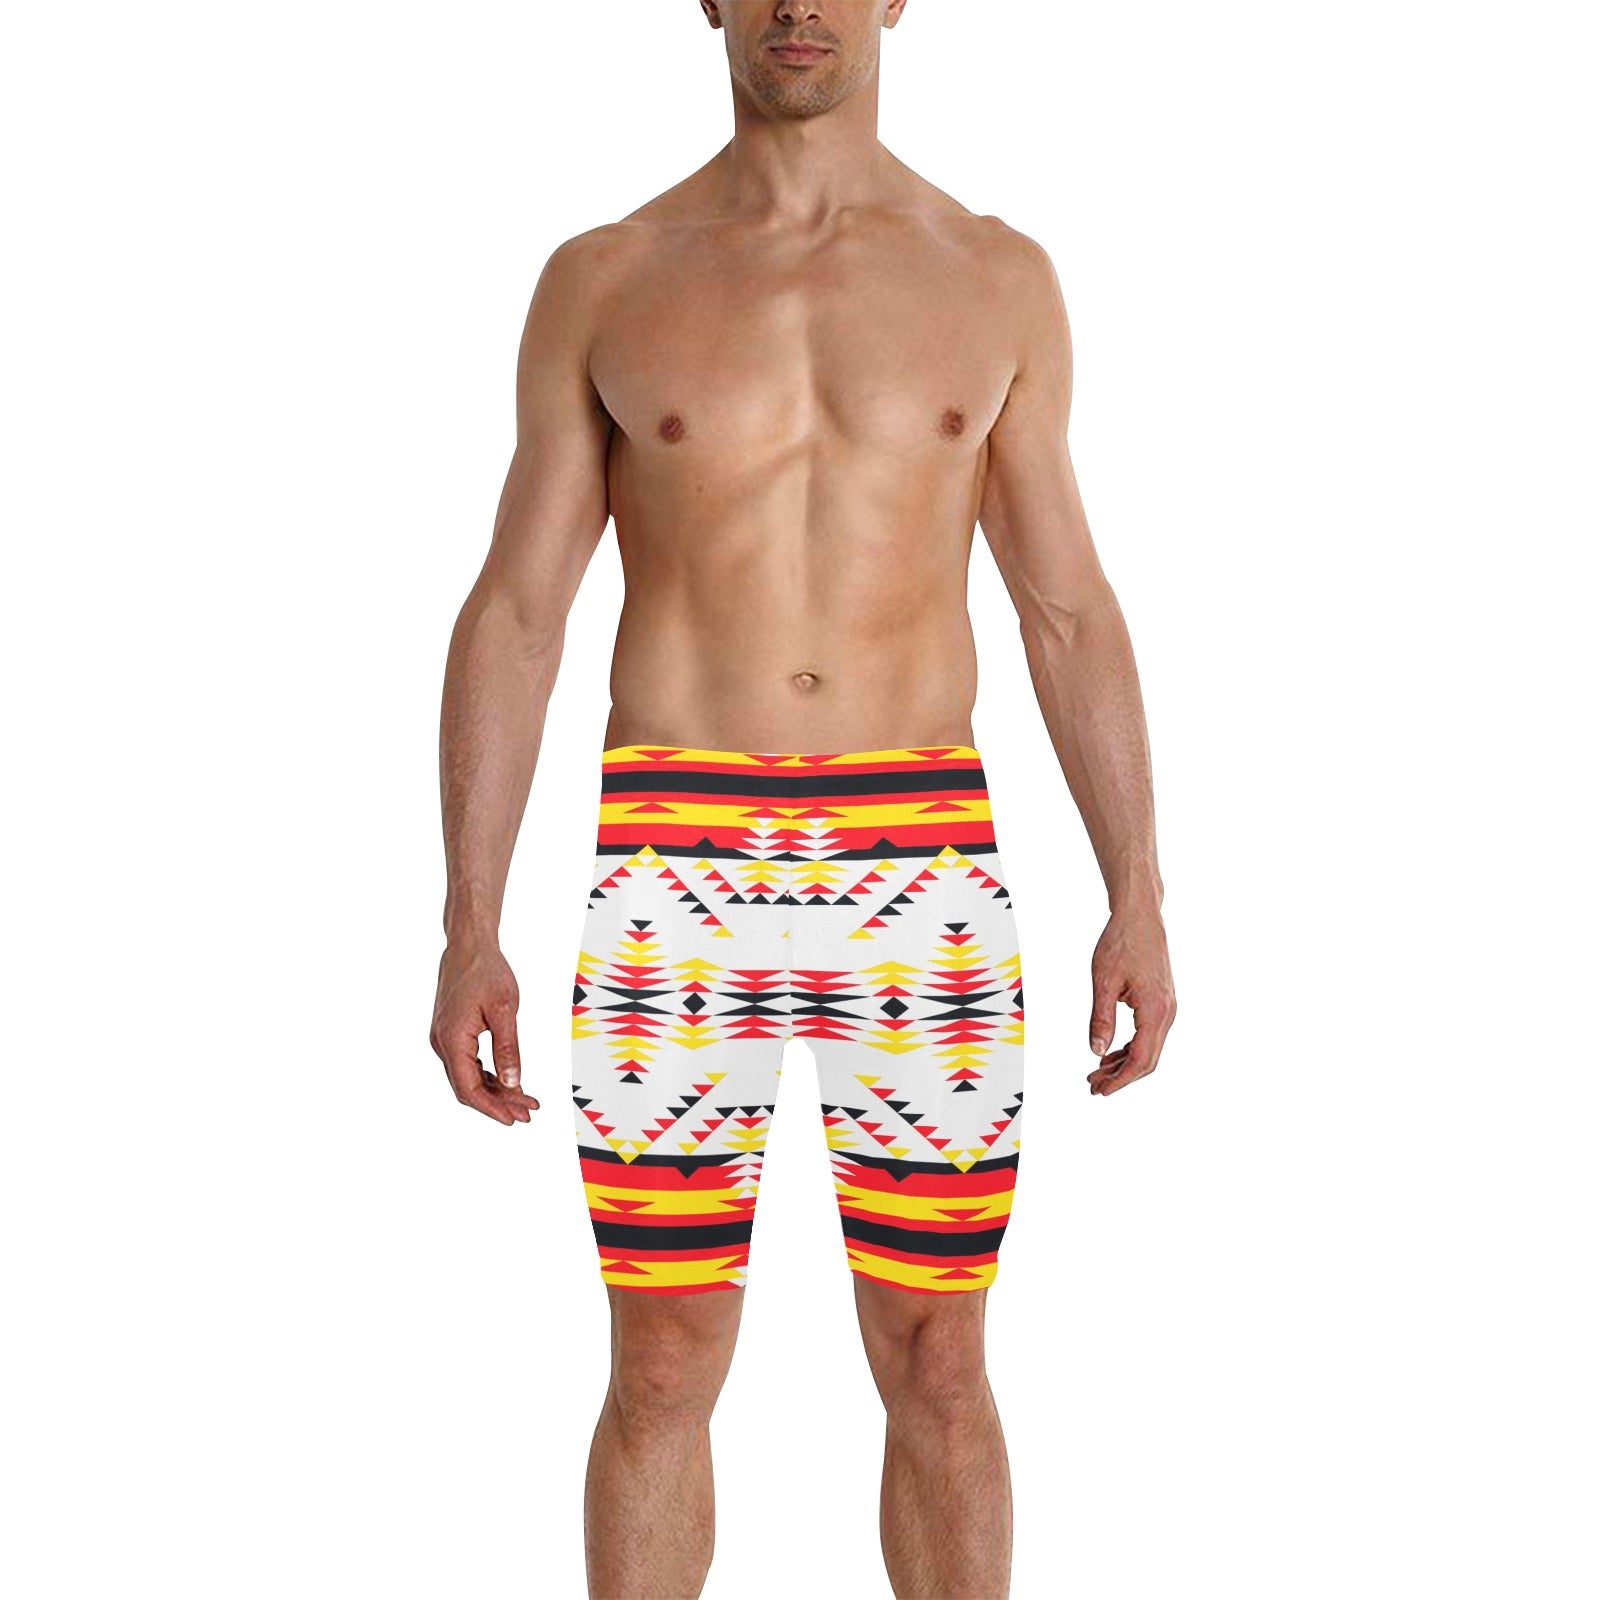 Visions of Peace Directions Men's Knee Length Swimming Trunks